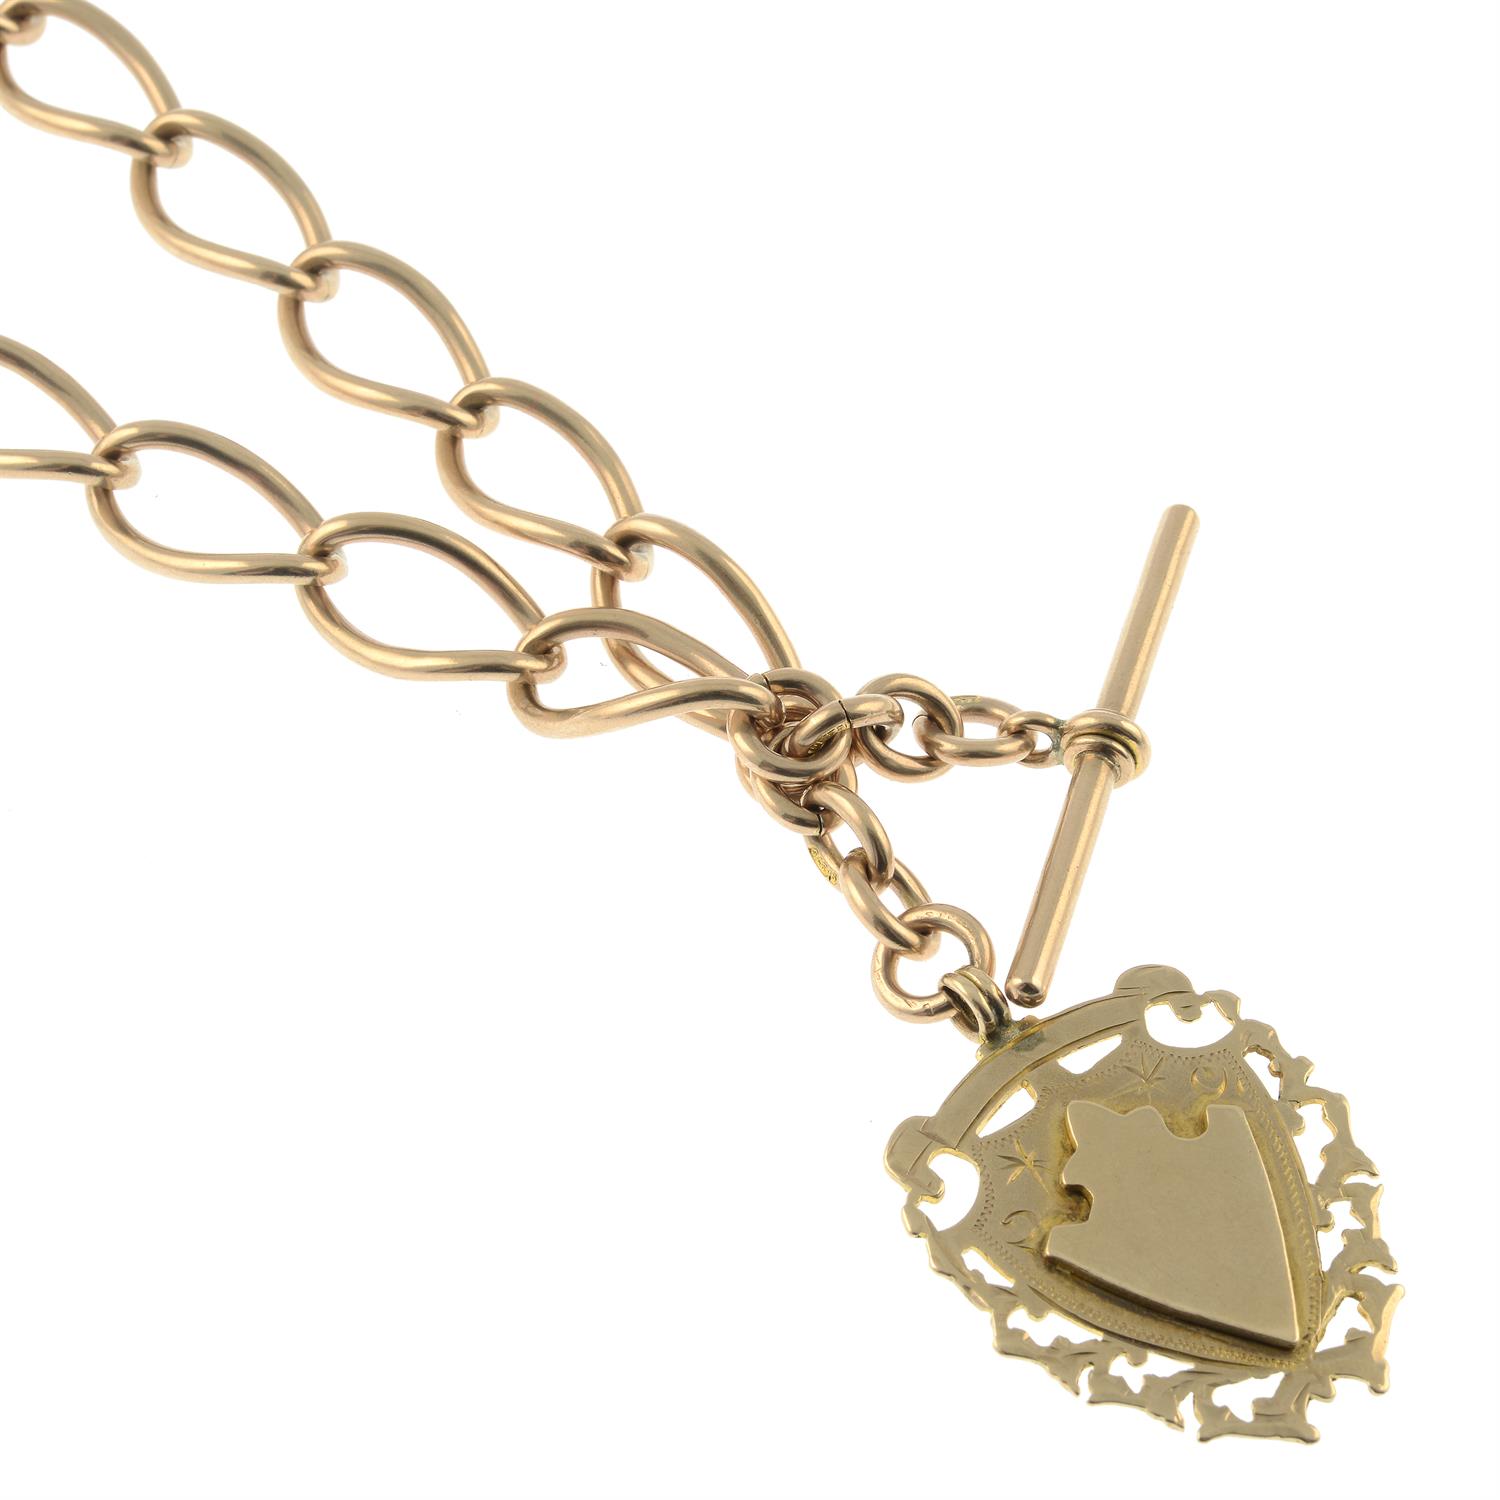 An early 20th century 9ct gold Albert, suspending a medallion fob.